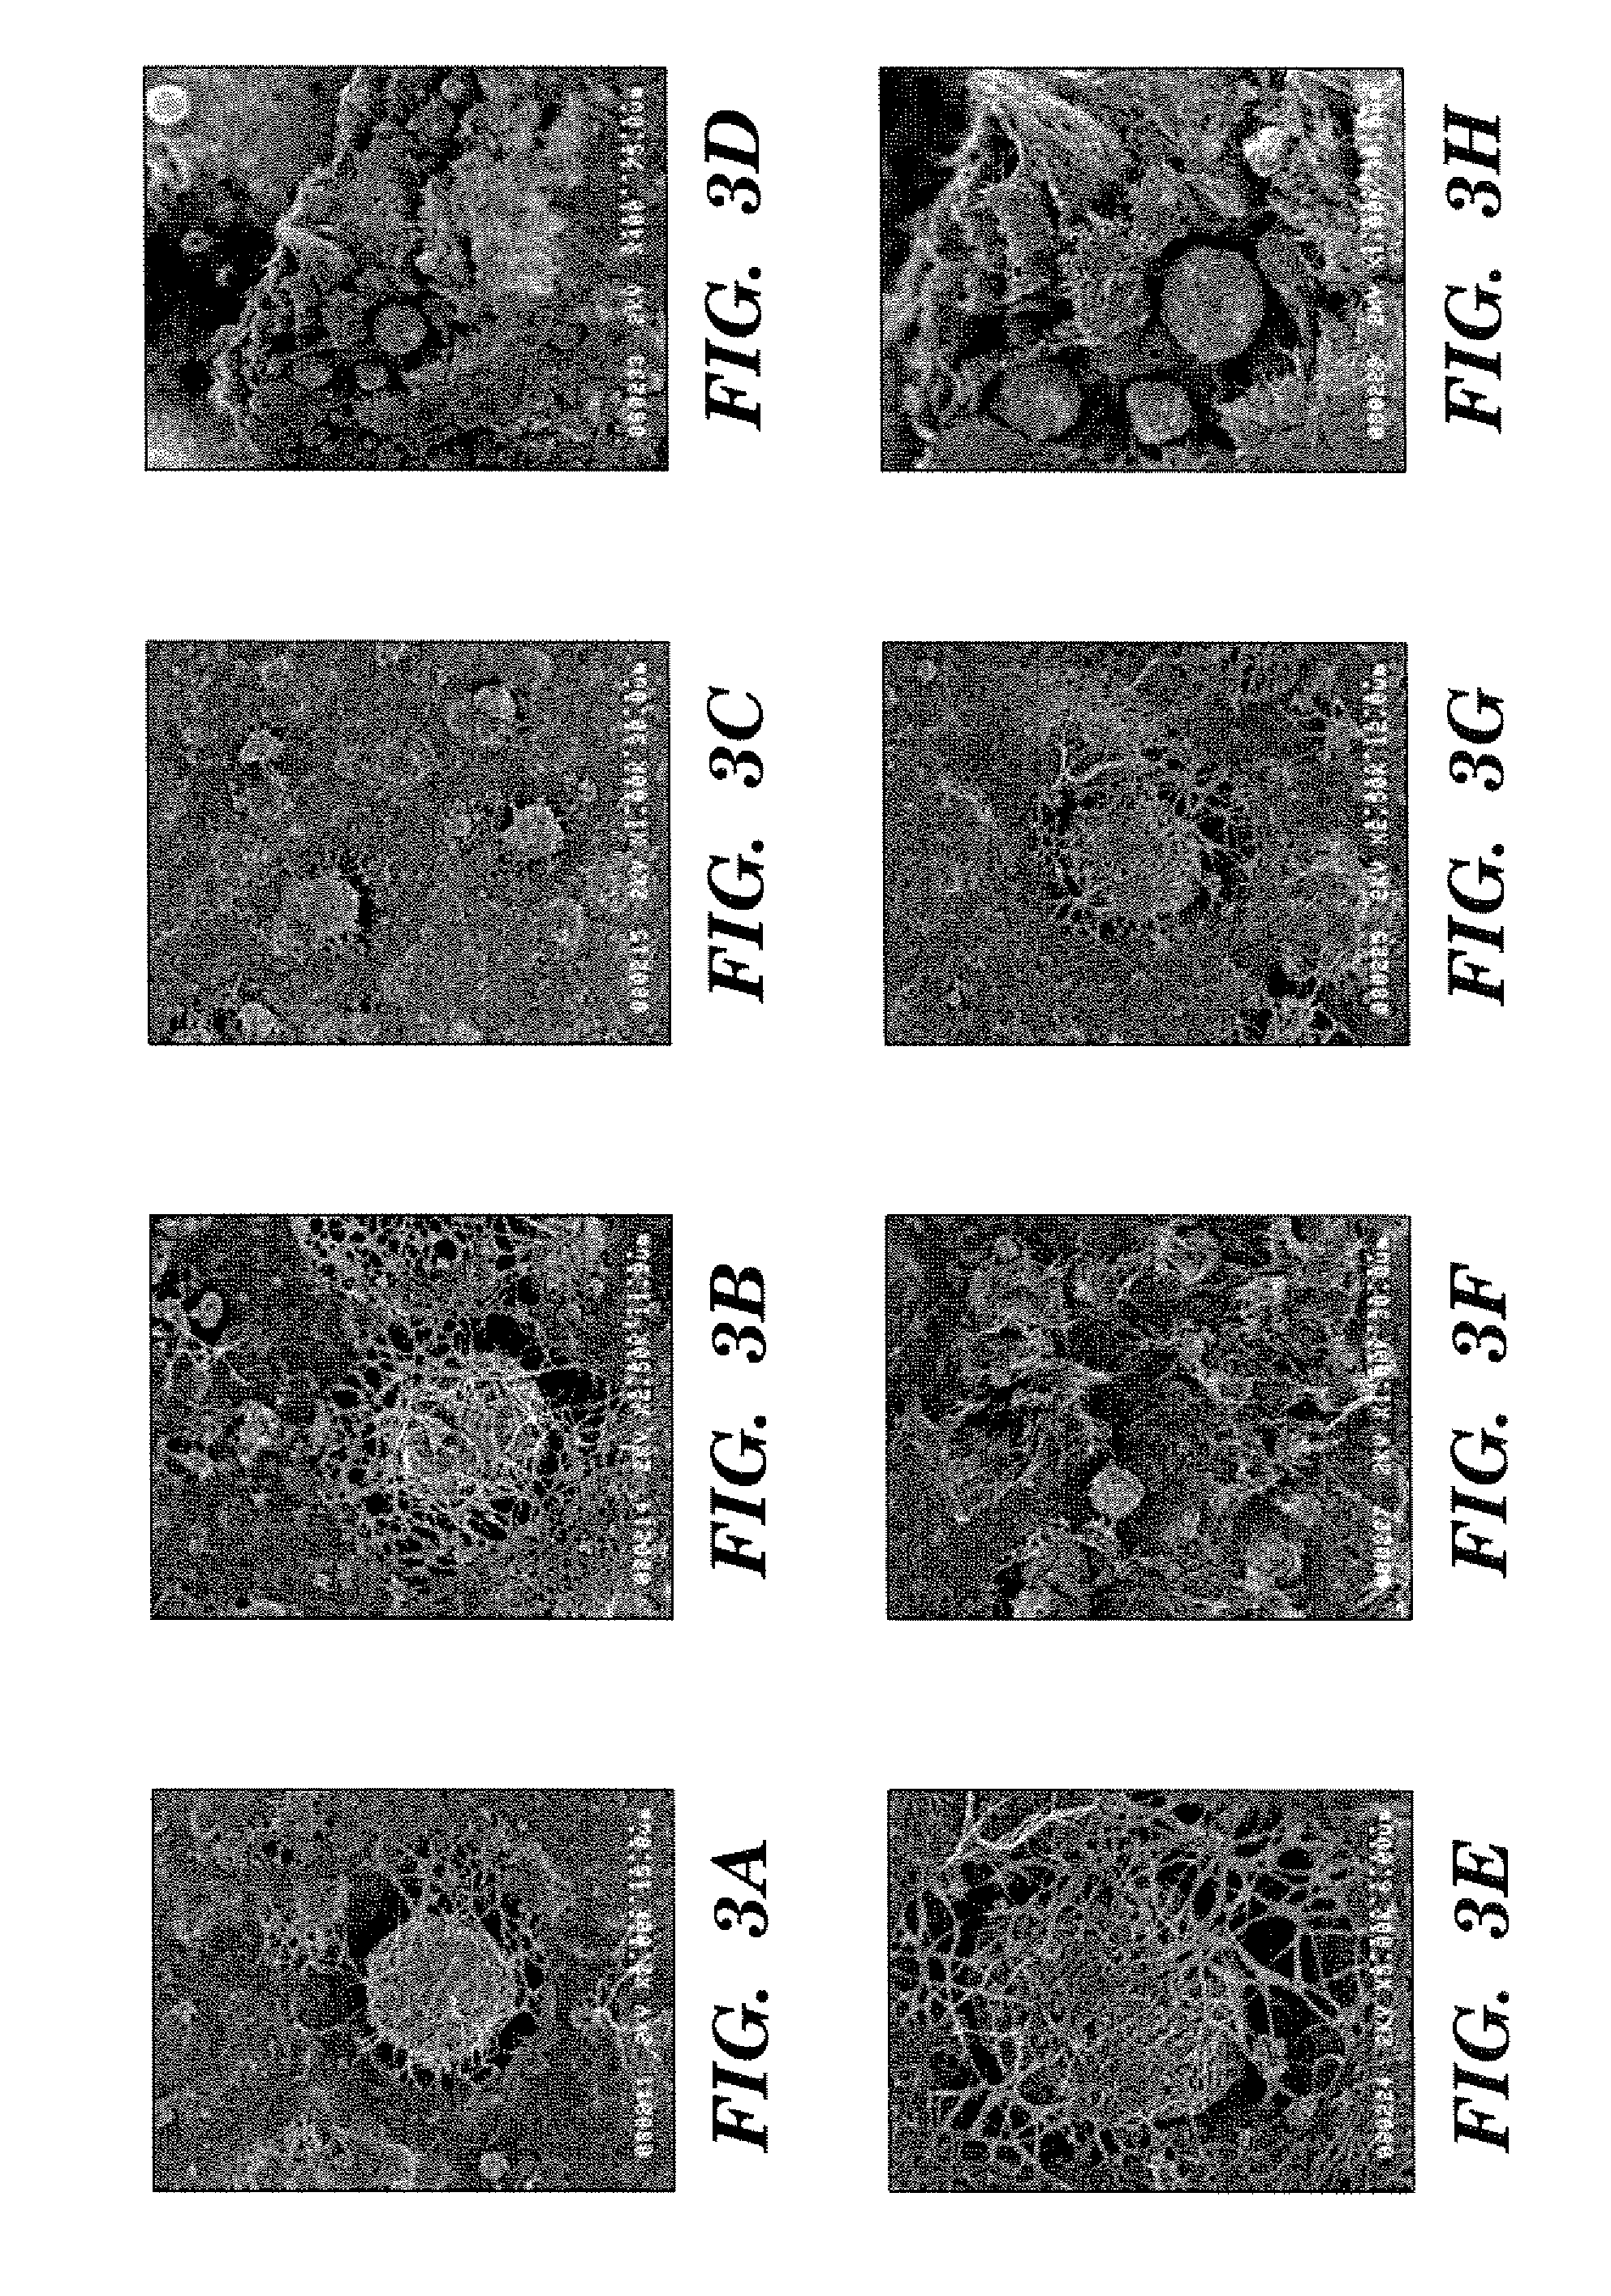 Freestanding carbon nanotube paper, methods of its making, and devices containing the same